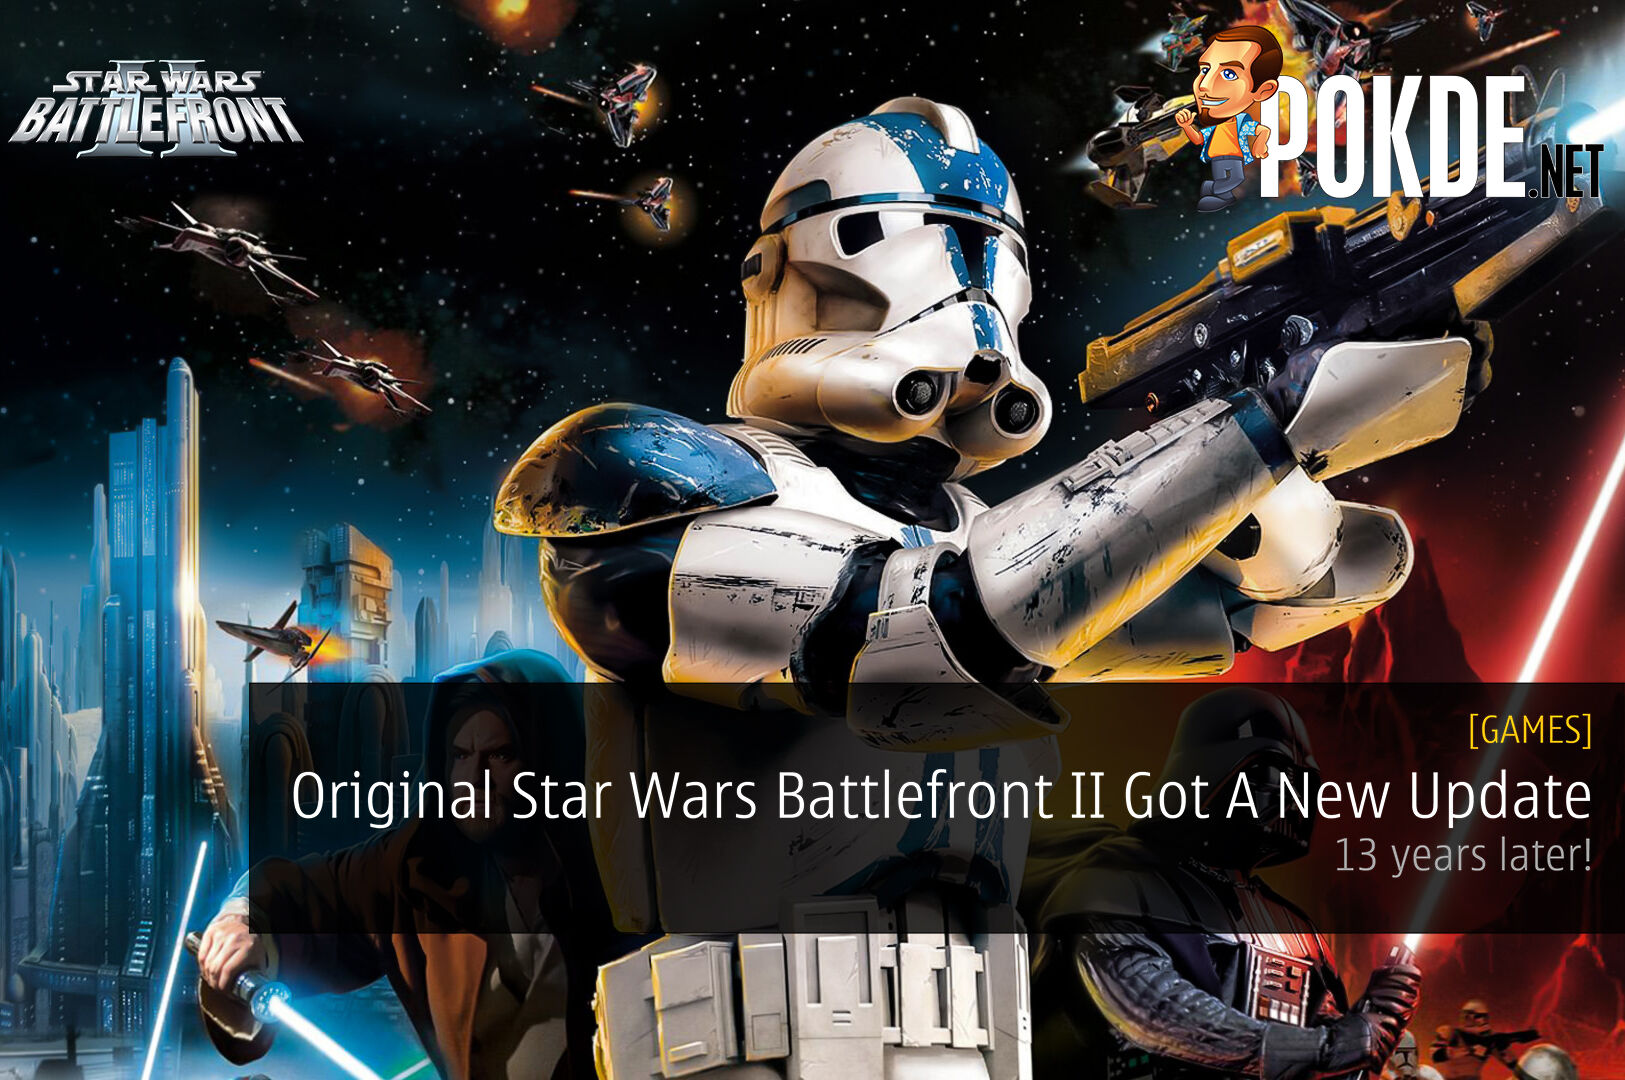 The Original Star Wars Battlefront II Just Got A New Update - 13 years later! 27